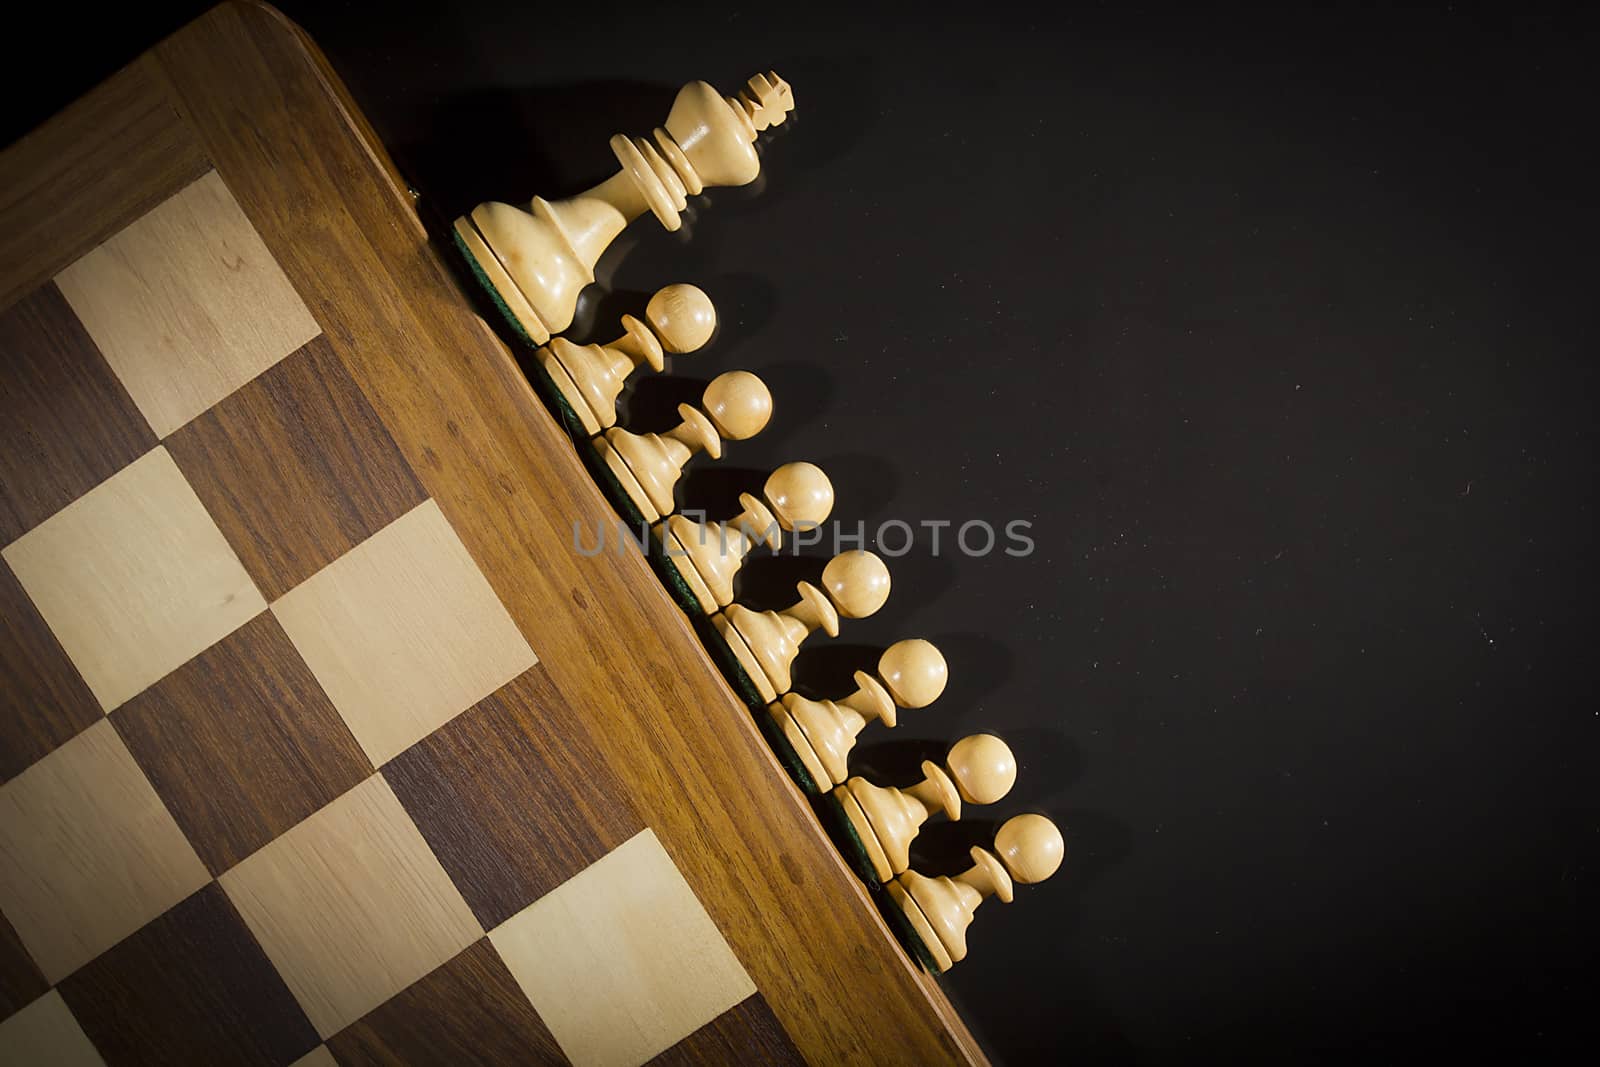 Wooden chess pieces and chess board on black background